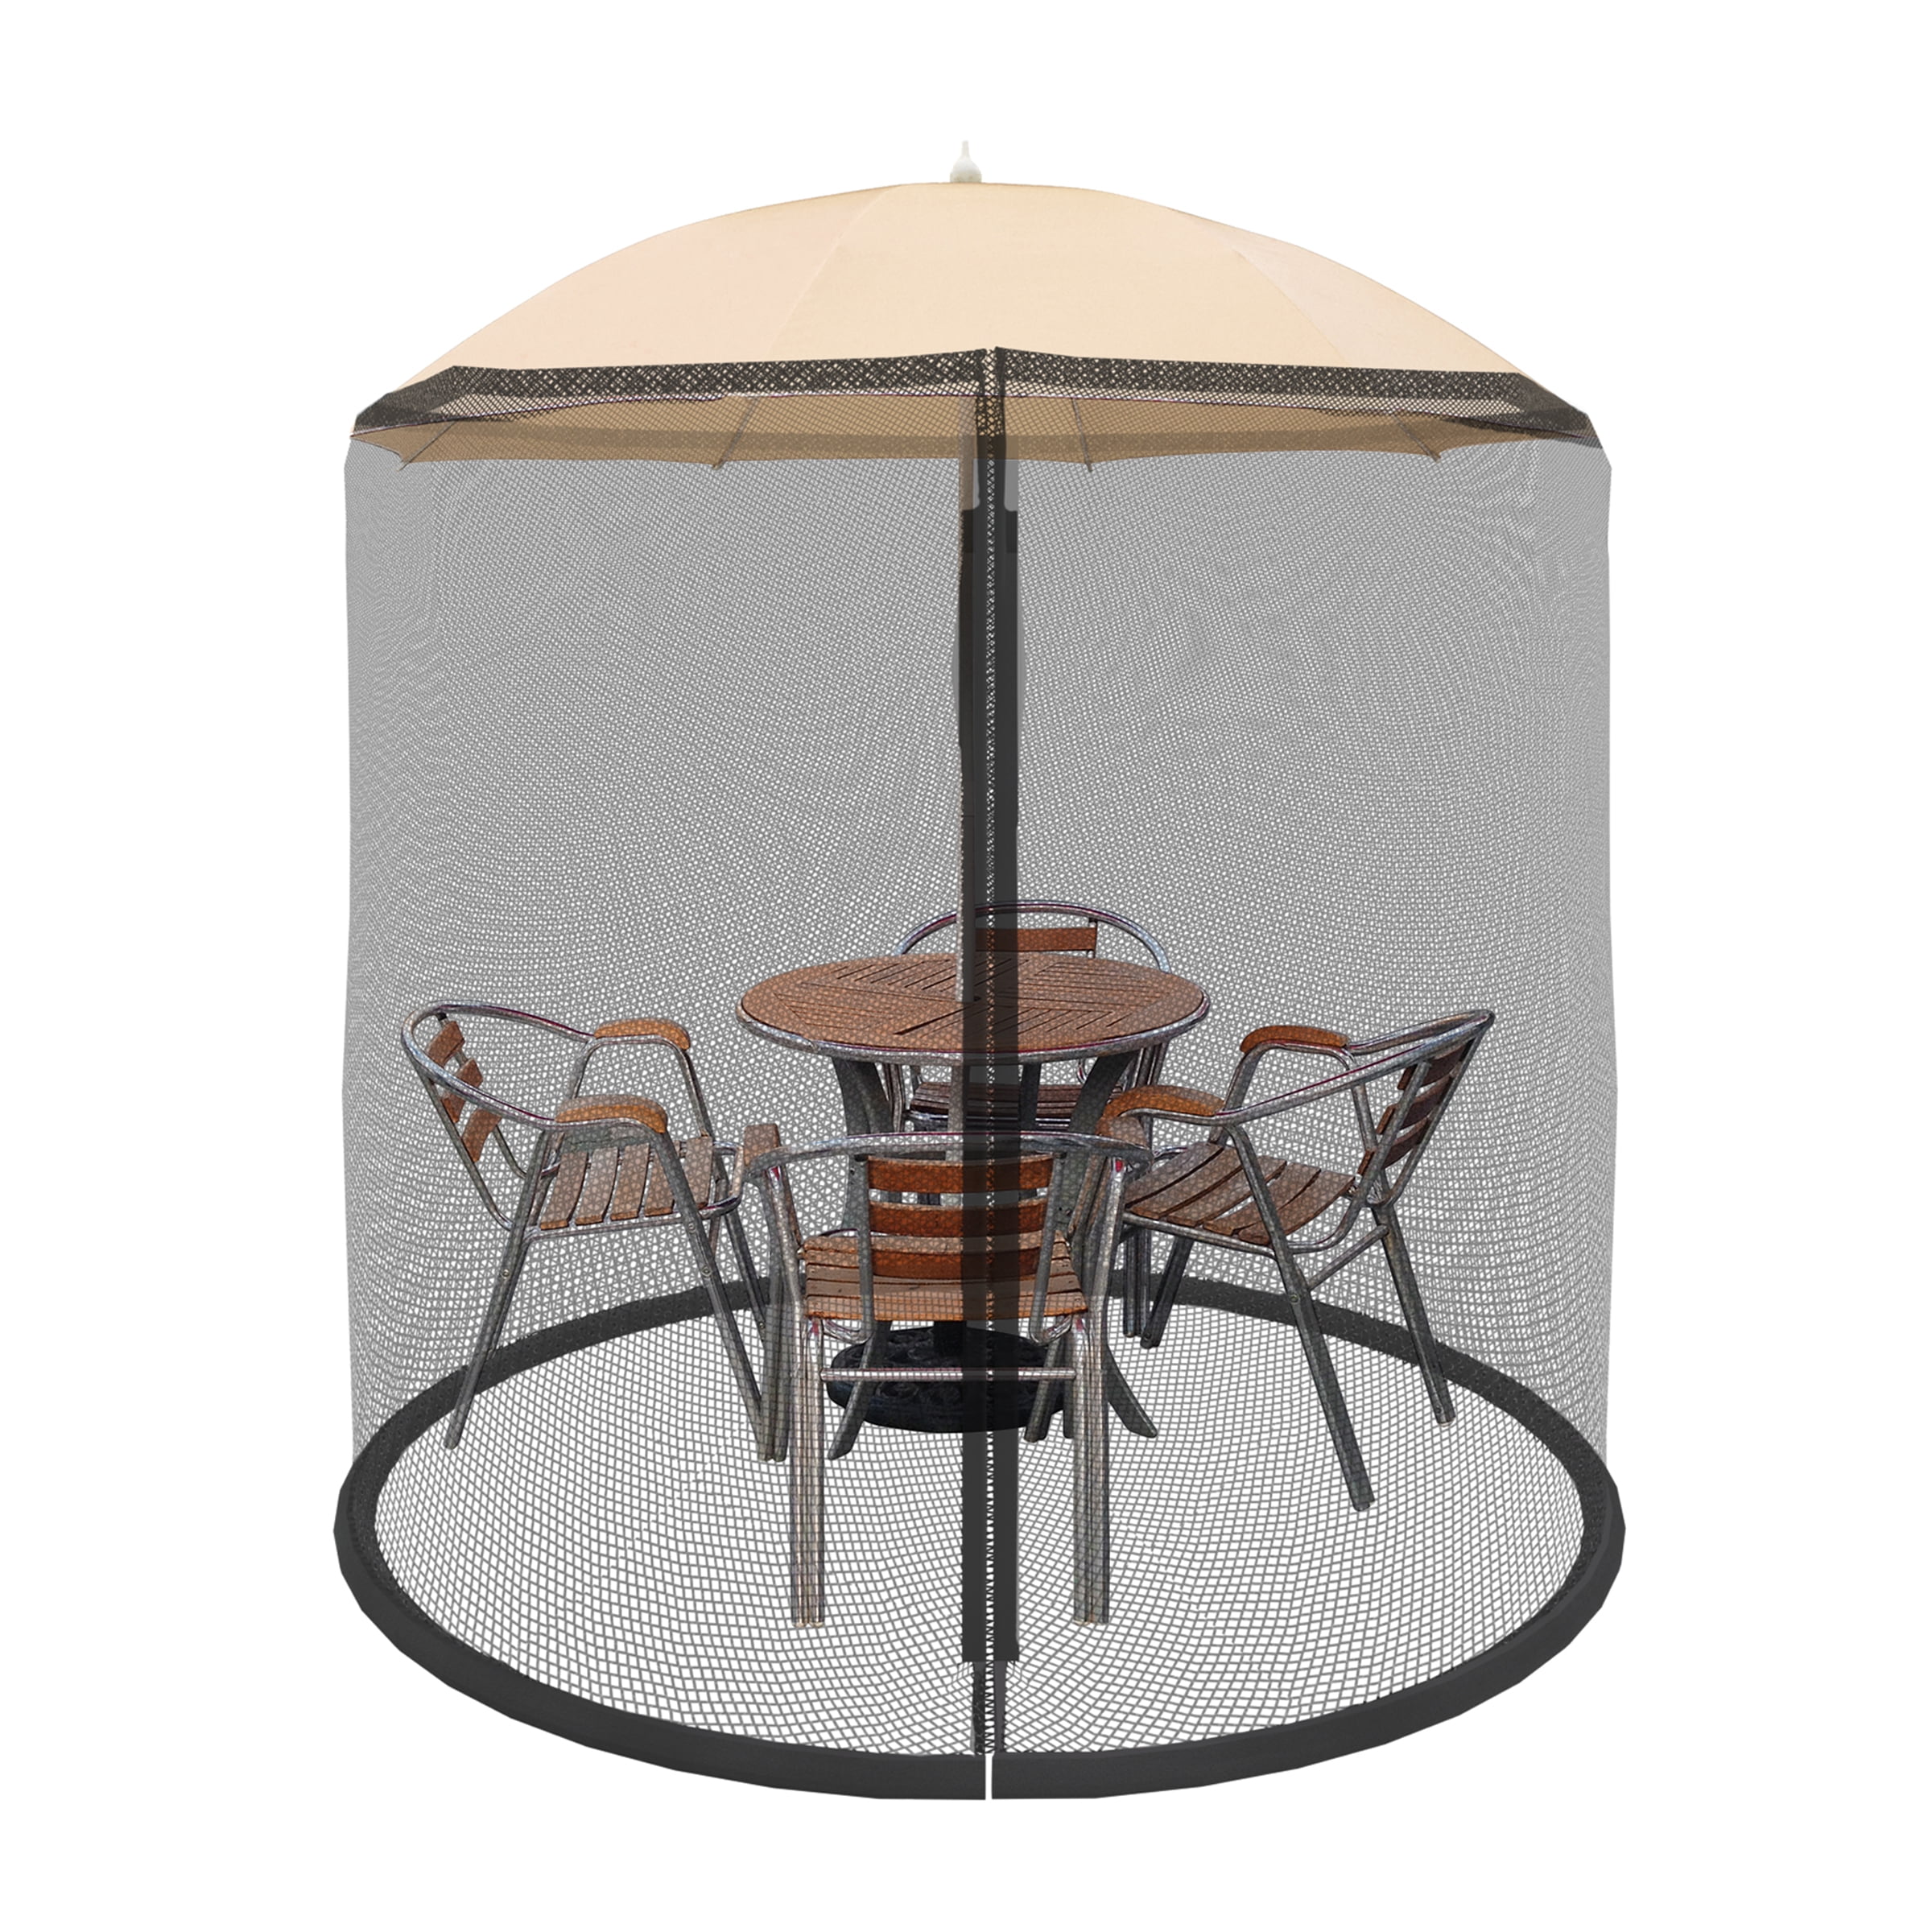 Mosquito Netting For Patio Umbrellas Protects Outdoor Tables From Insects Fits Up To 7 5 By Pure Garden Com - Bug Net For Patio Umbrella